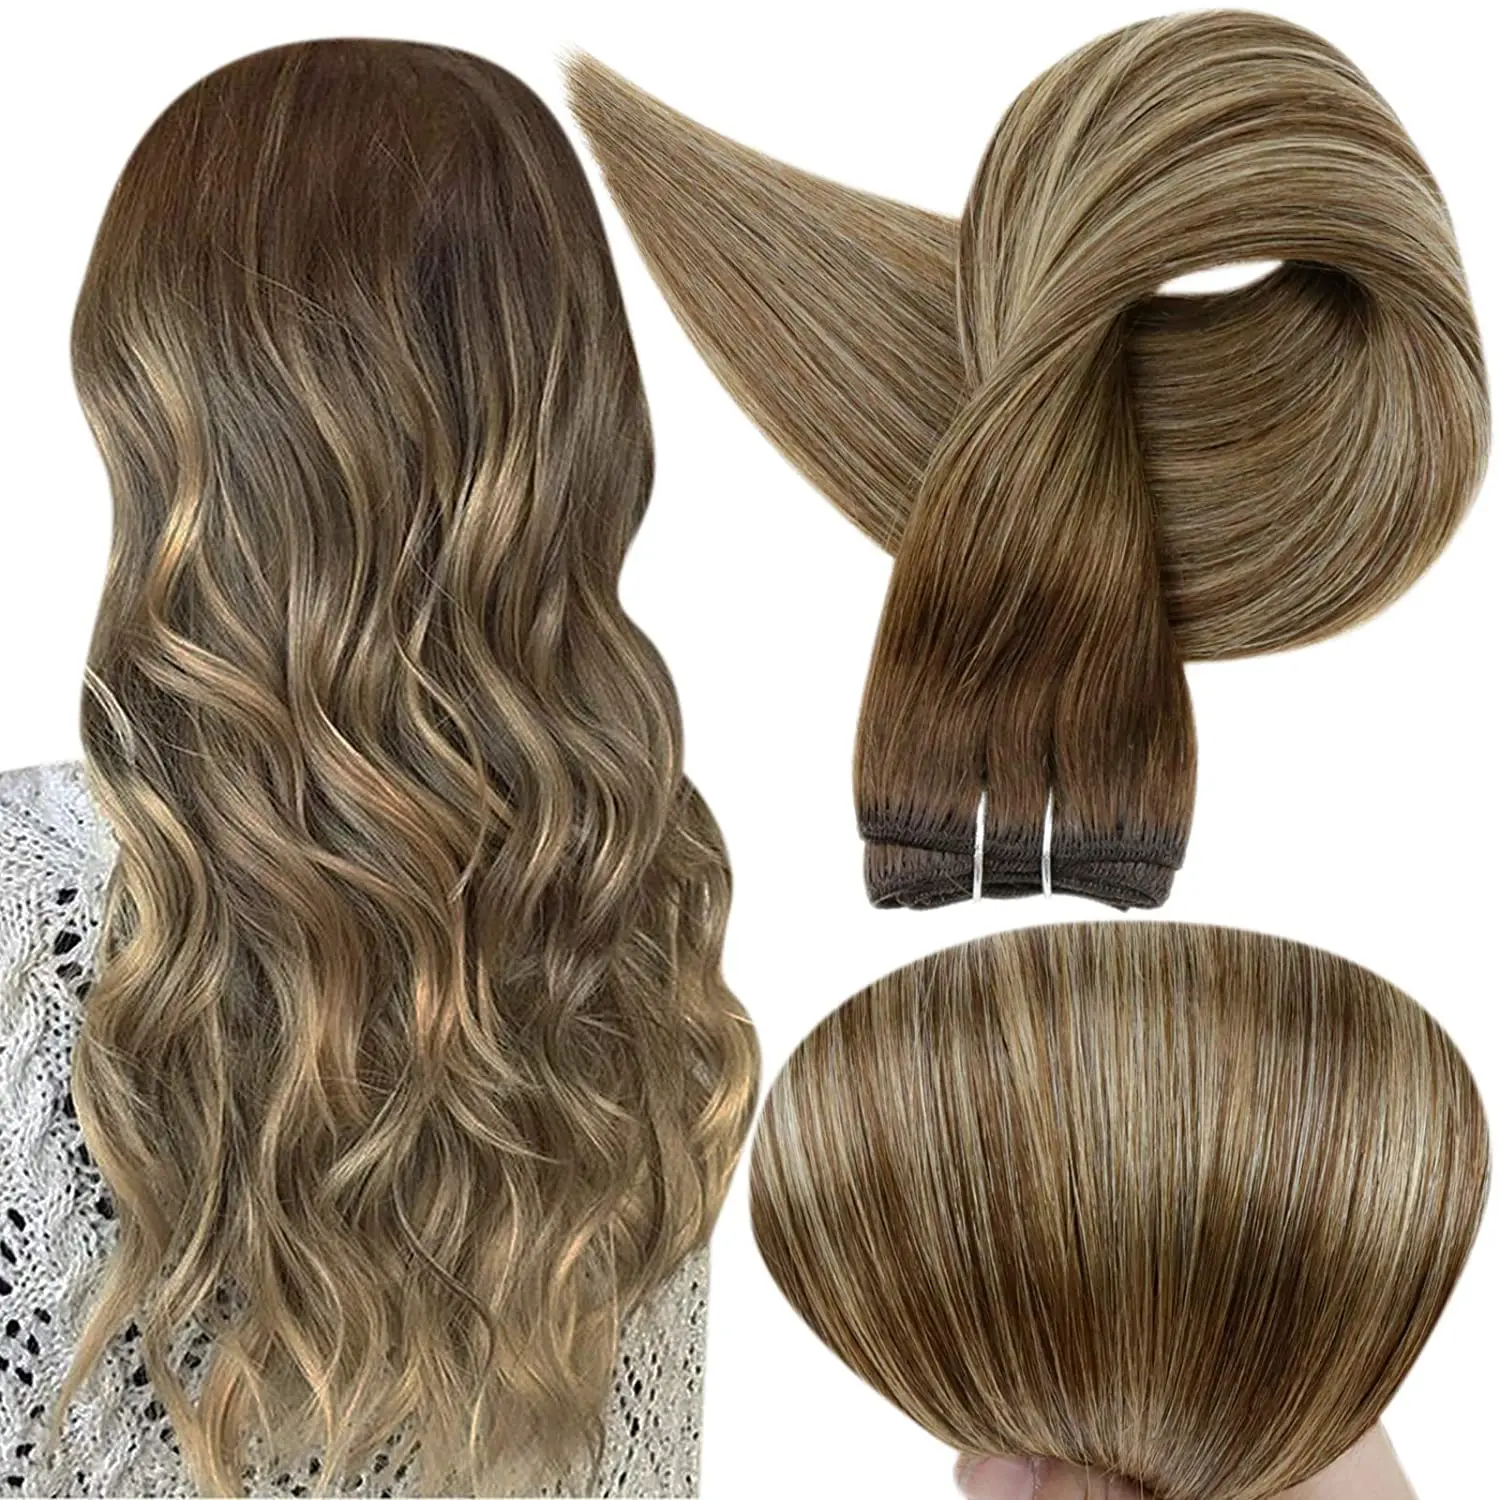 

Full Shine Human Hair Wefts Hair Bundles Ombre Blonde Color 100g Sew In Weft Silky Straight Machine Remy Skin Double Weft Woman